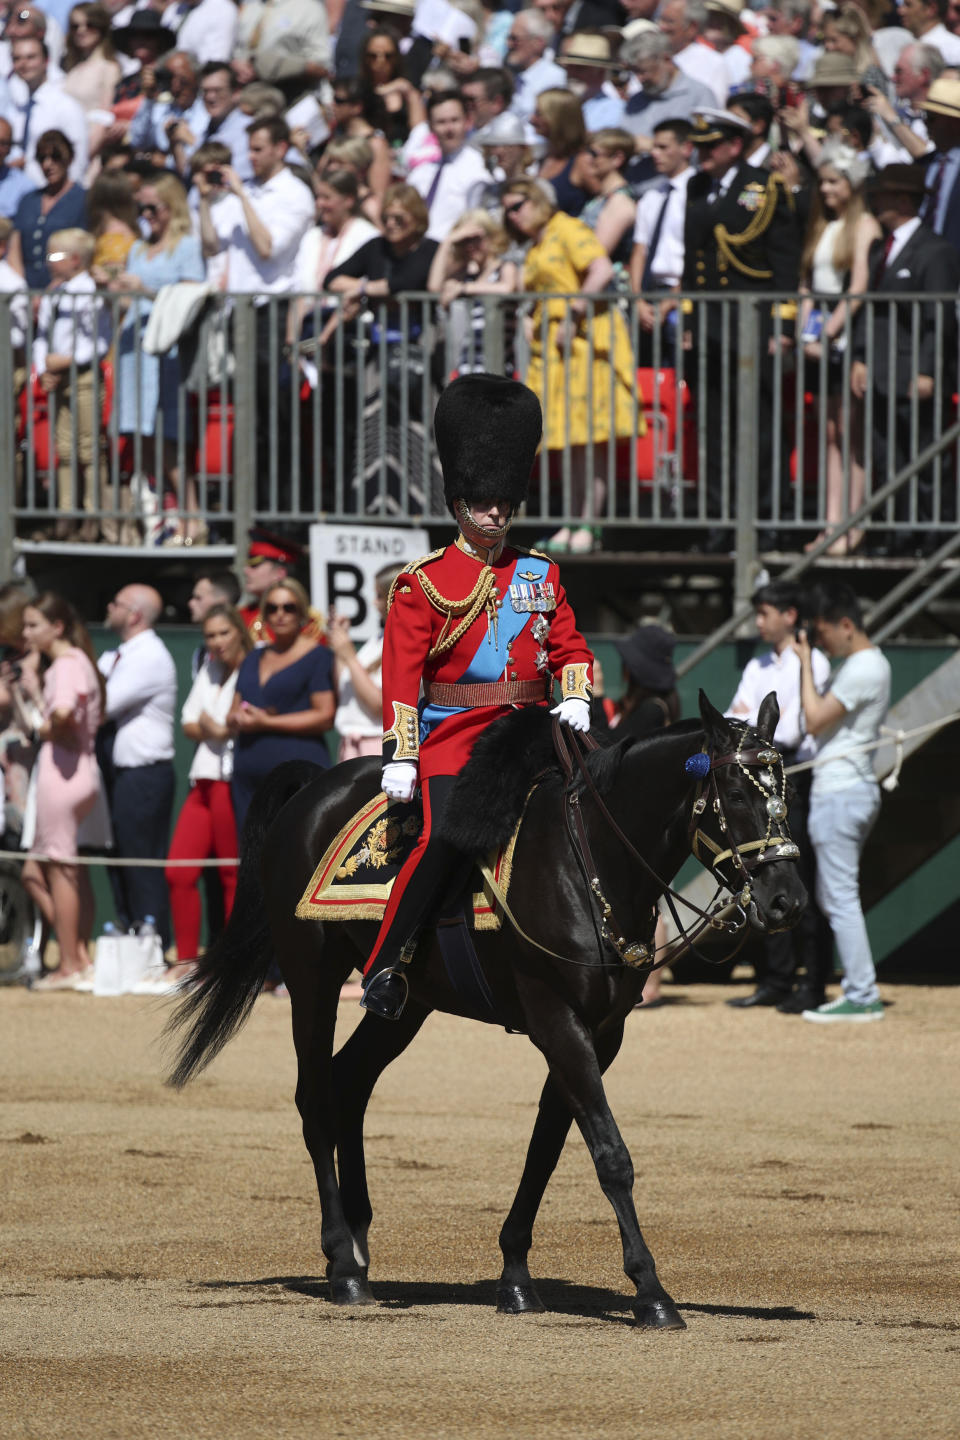 File Britain's Prince Andrew, Colonel of the Grenadier Guards, rides in his first year as the inspecting officer after taking over the role from his father Prince Philip, late in 2017, during the Colonel's Review on The Mall in London, June 1, 2019. Buckingham Palace says that Prince Andrew’s military affiliations and royal patronages have been returned to Queen Elizabeth II with her “approval and agreement.” The palace statement issued on Thursday, Jan. 13, 2022 came after more than 150 navy and army veterans wrote to the queen asking her to strip Andrew of all his military ranks and titles amid continued legal trouble for the prince, who is embroiled in a sex assault lawsuit in the U.S. (Yui Mok PA via AP, File)